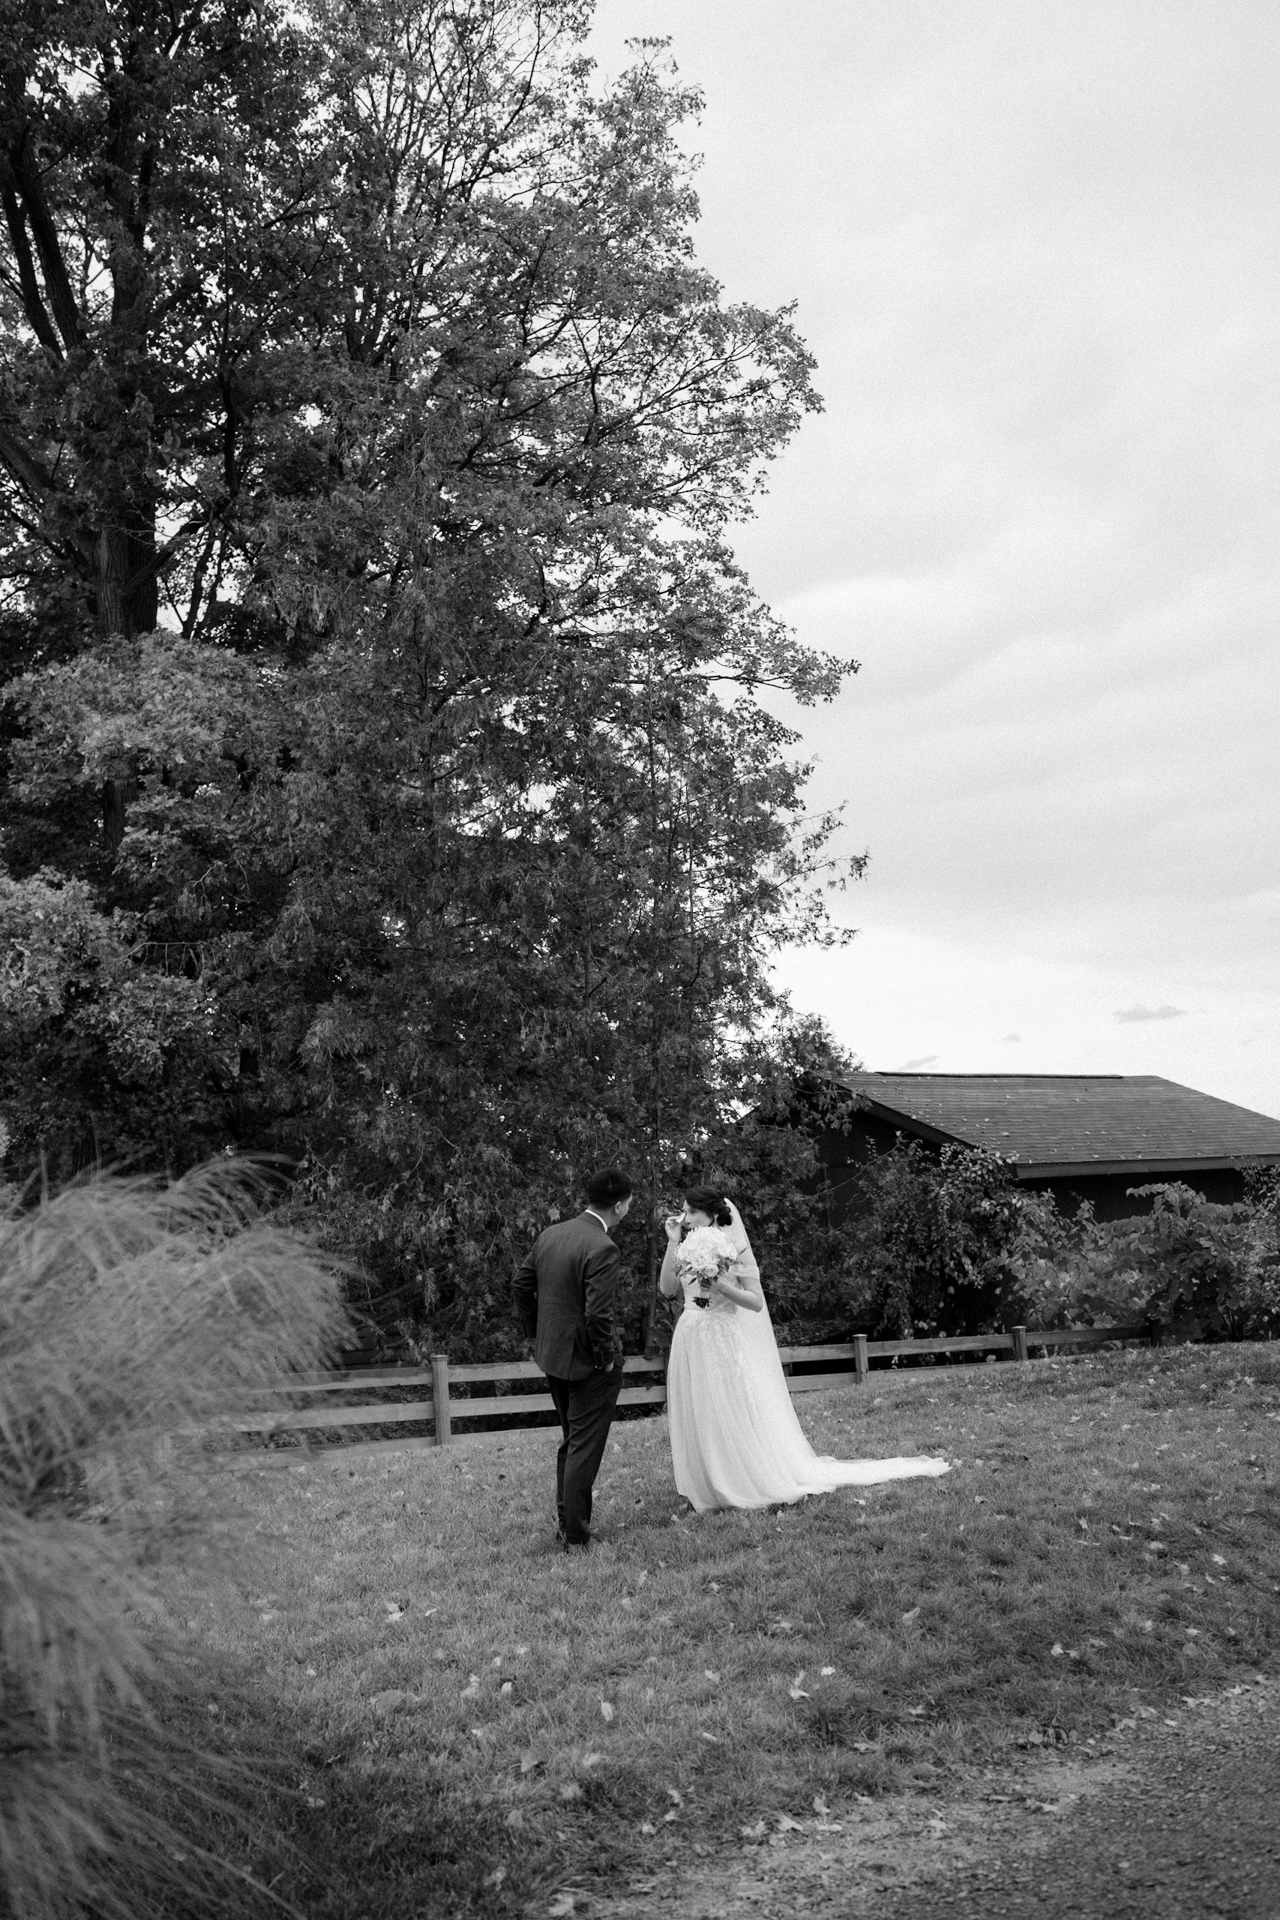 A bride and groom standing together on a lawn with autumn foliage in the background